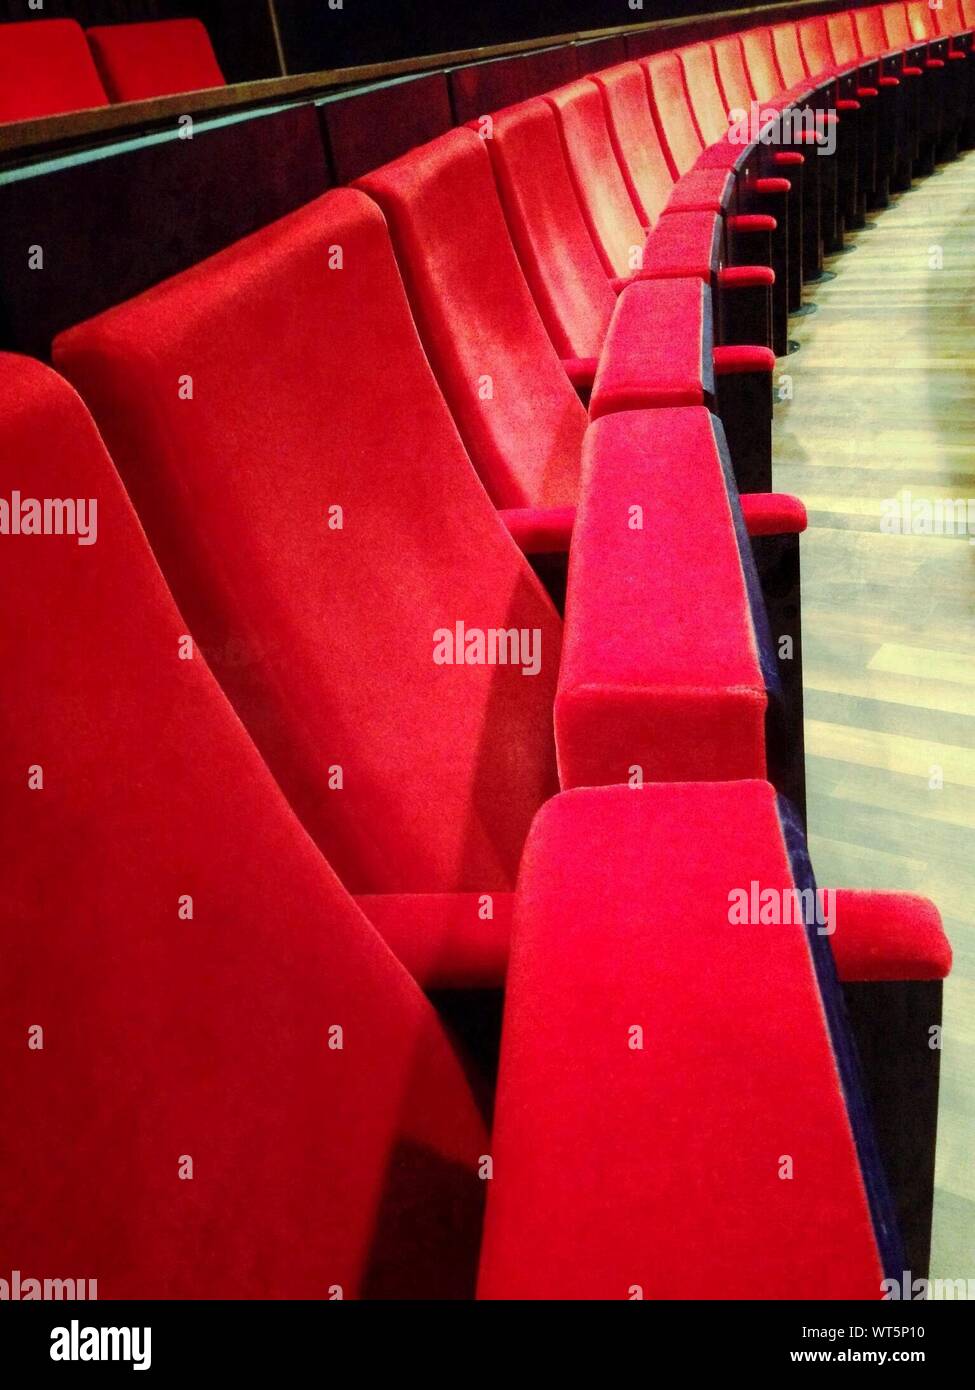 Empty Folded Seats At Musical Theater Stock Photo